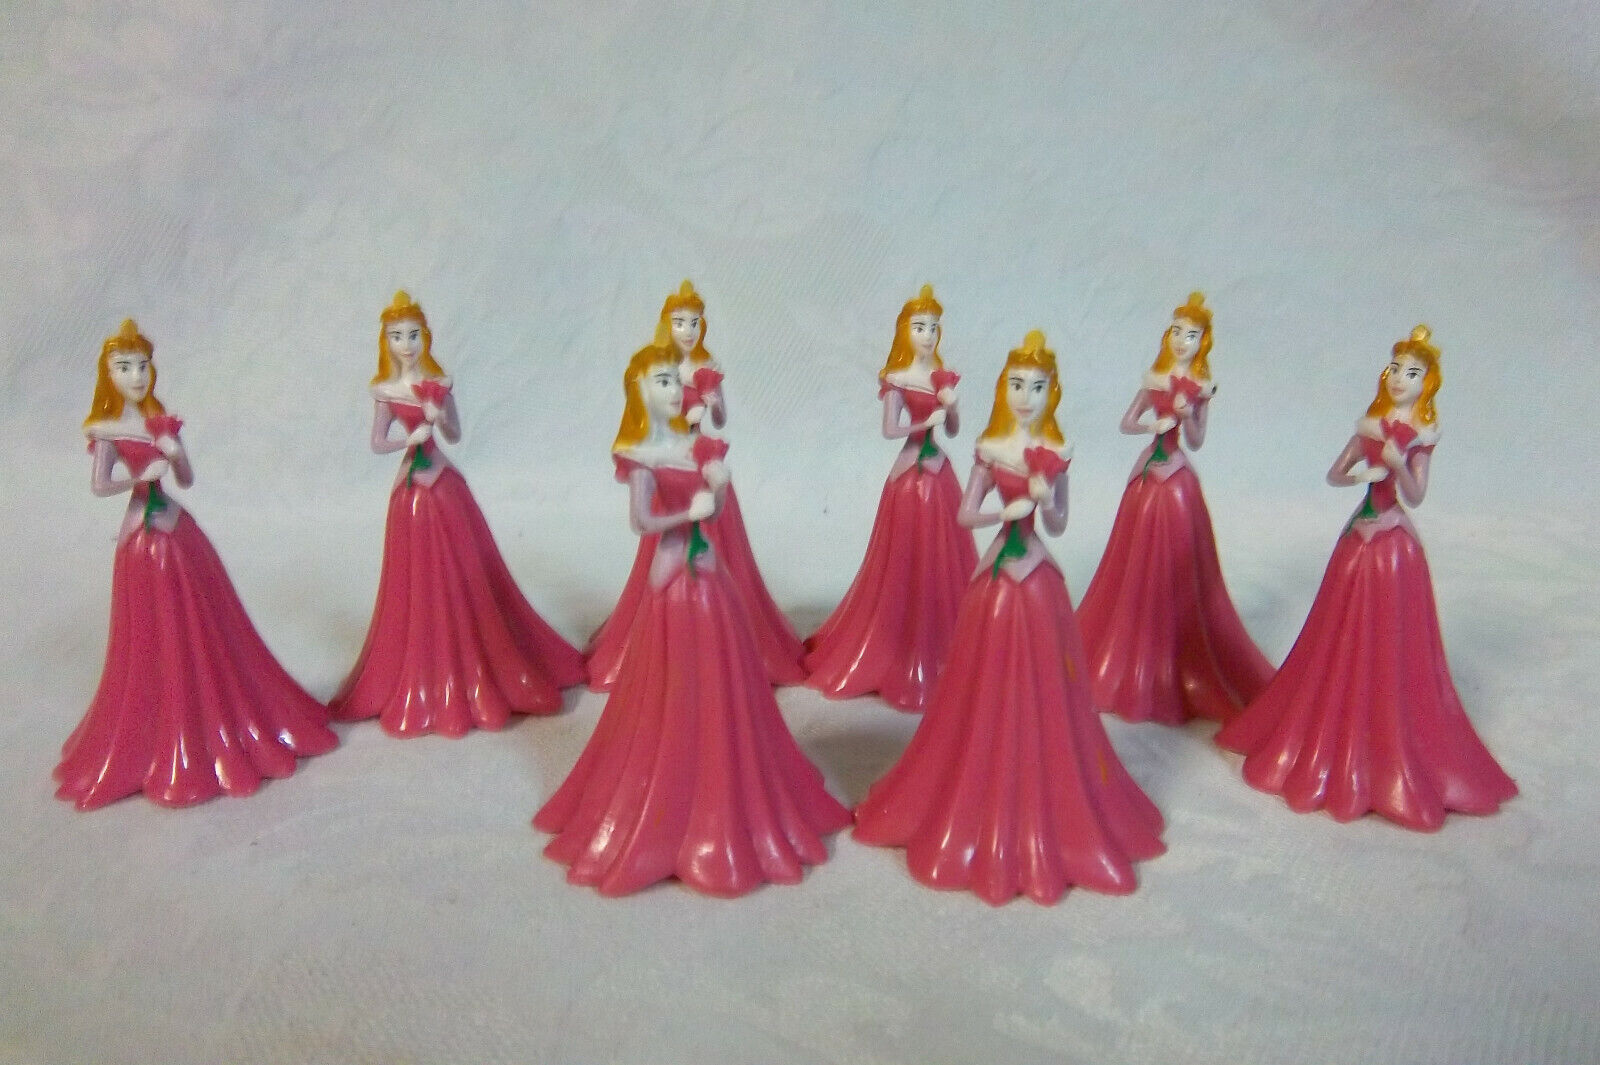 Aurora Sleeping Beauty Princess Figures 2" Cake Toppers Toy